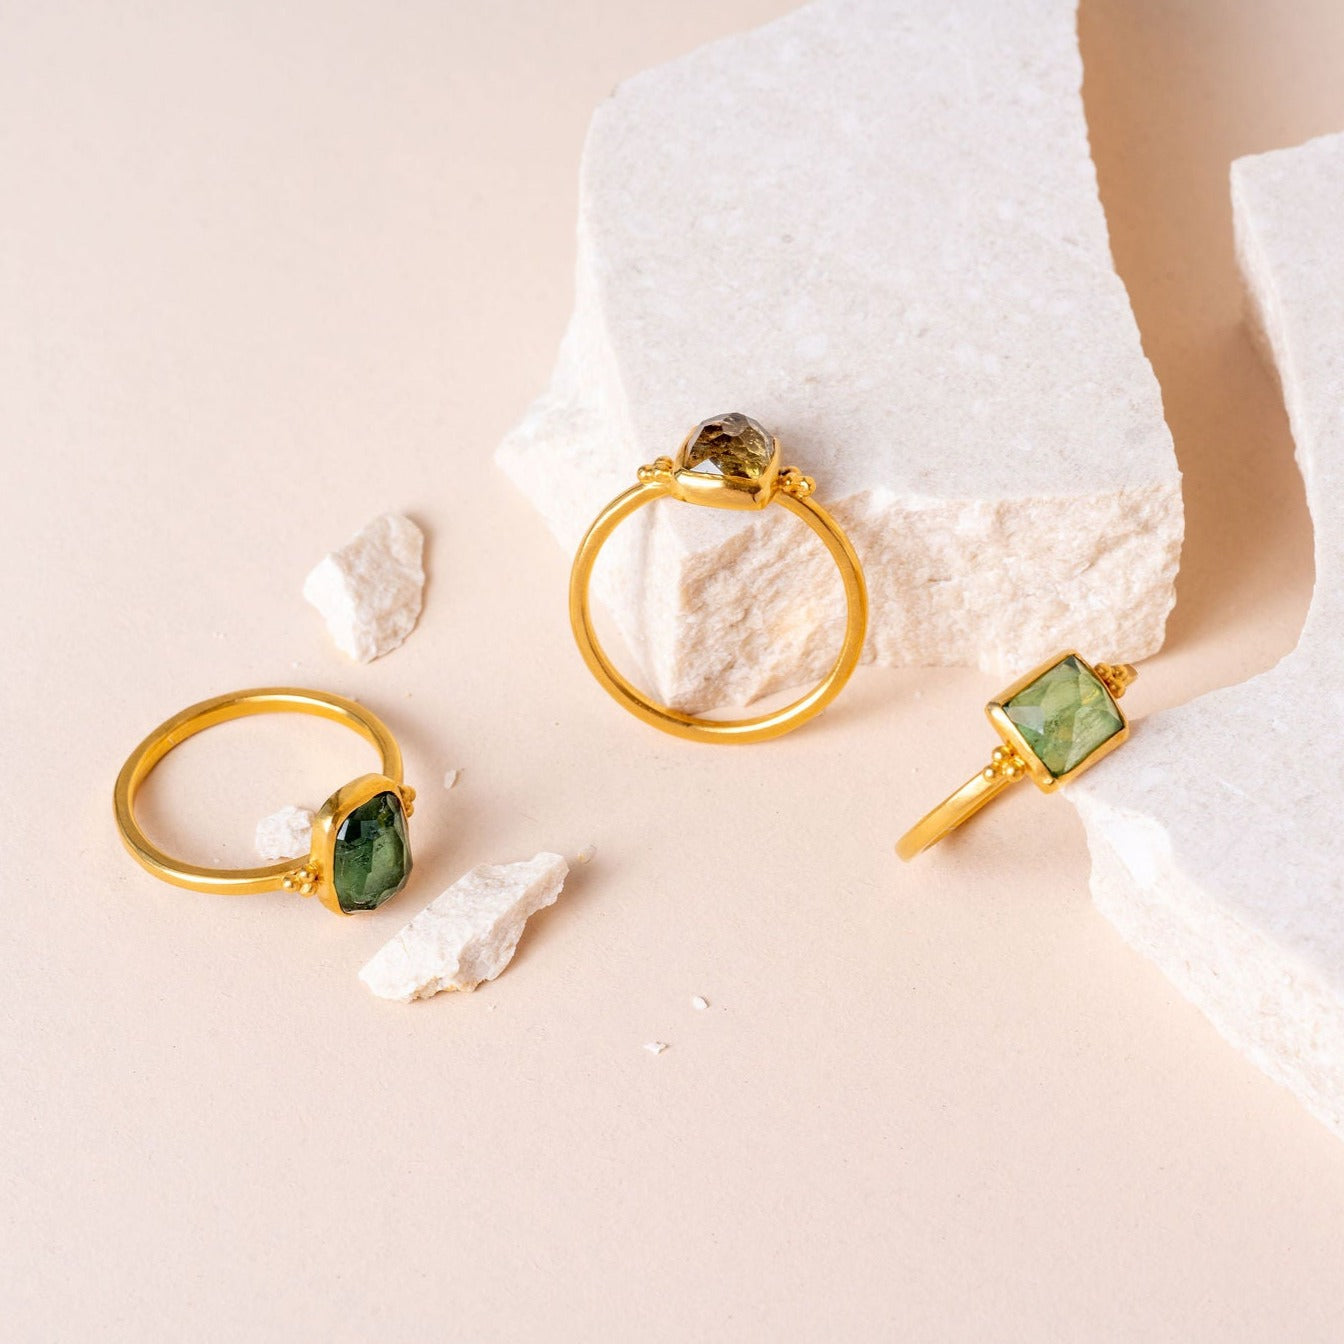 A group of three handcrafted gold vermeil rings featuring delicate granulation detailing and rose cut gemstones in shades of green.